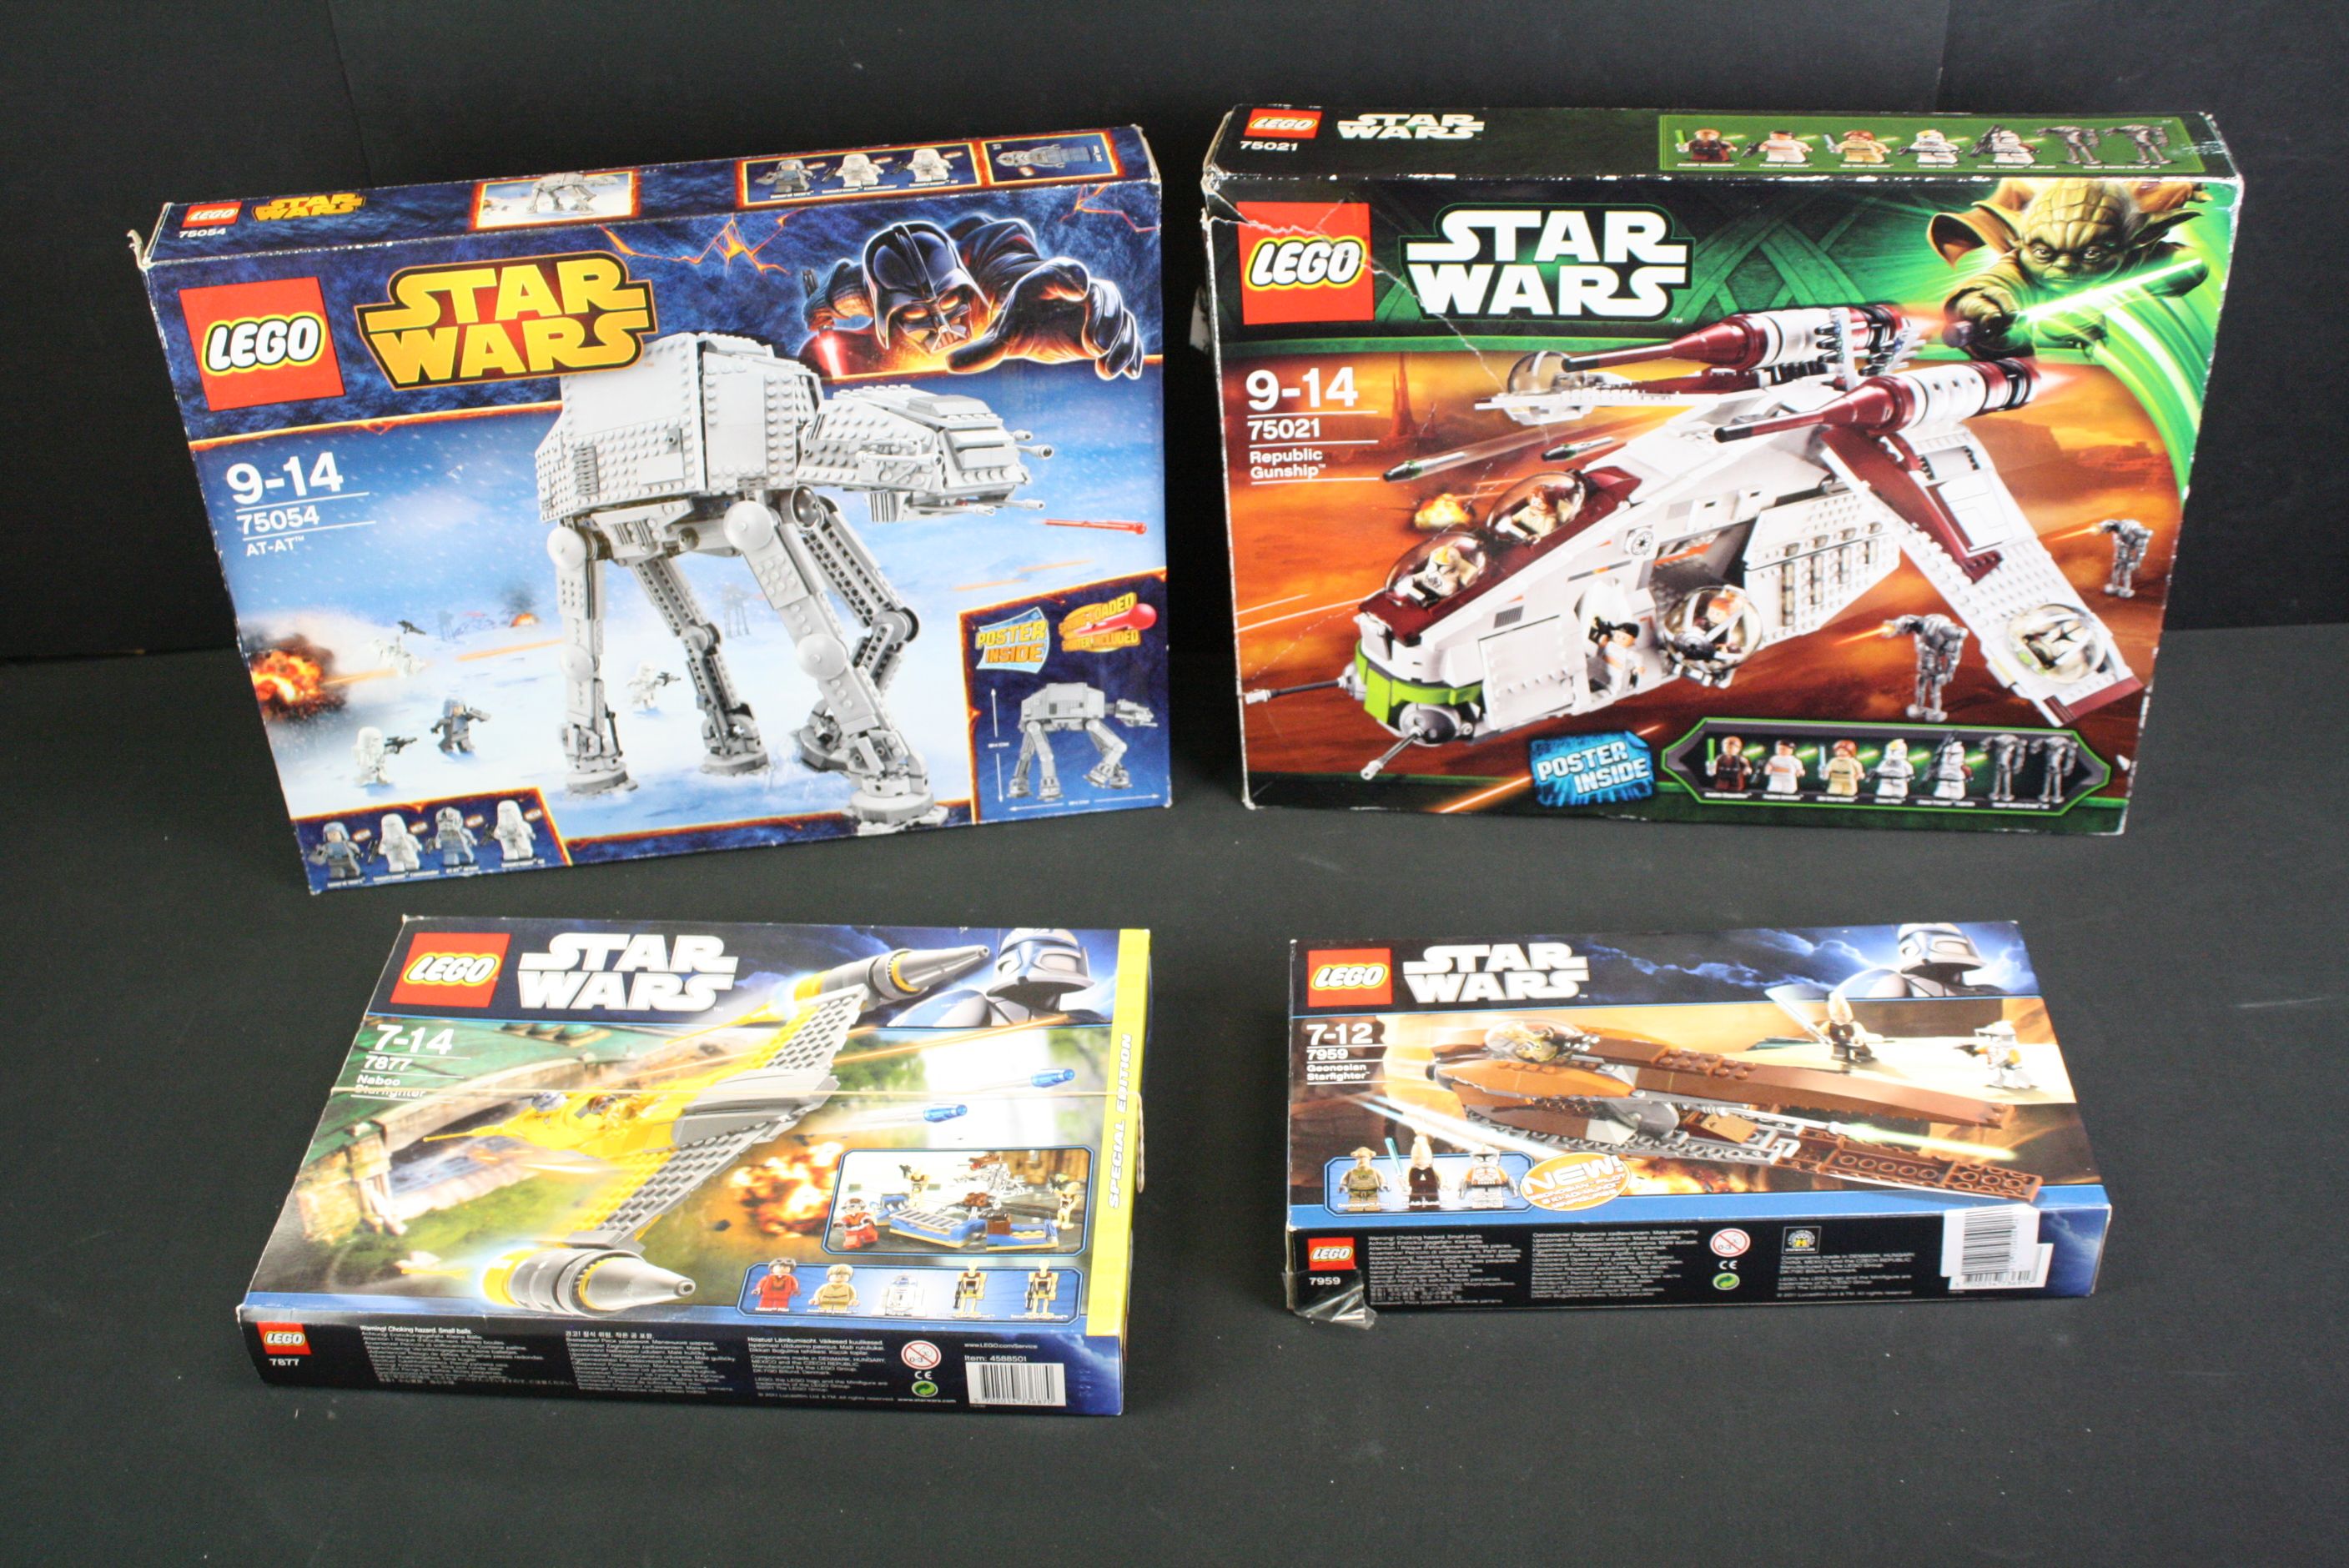 Lego - Four boxed Lego Star Wars sets to include 75021 Republic Gunship, 75054 AT-AT, 7877 Naboo